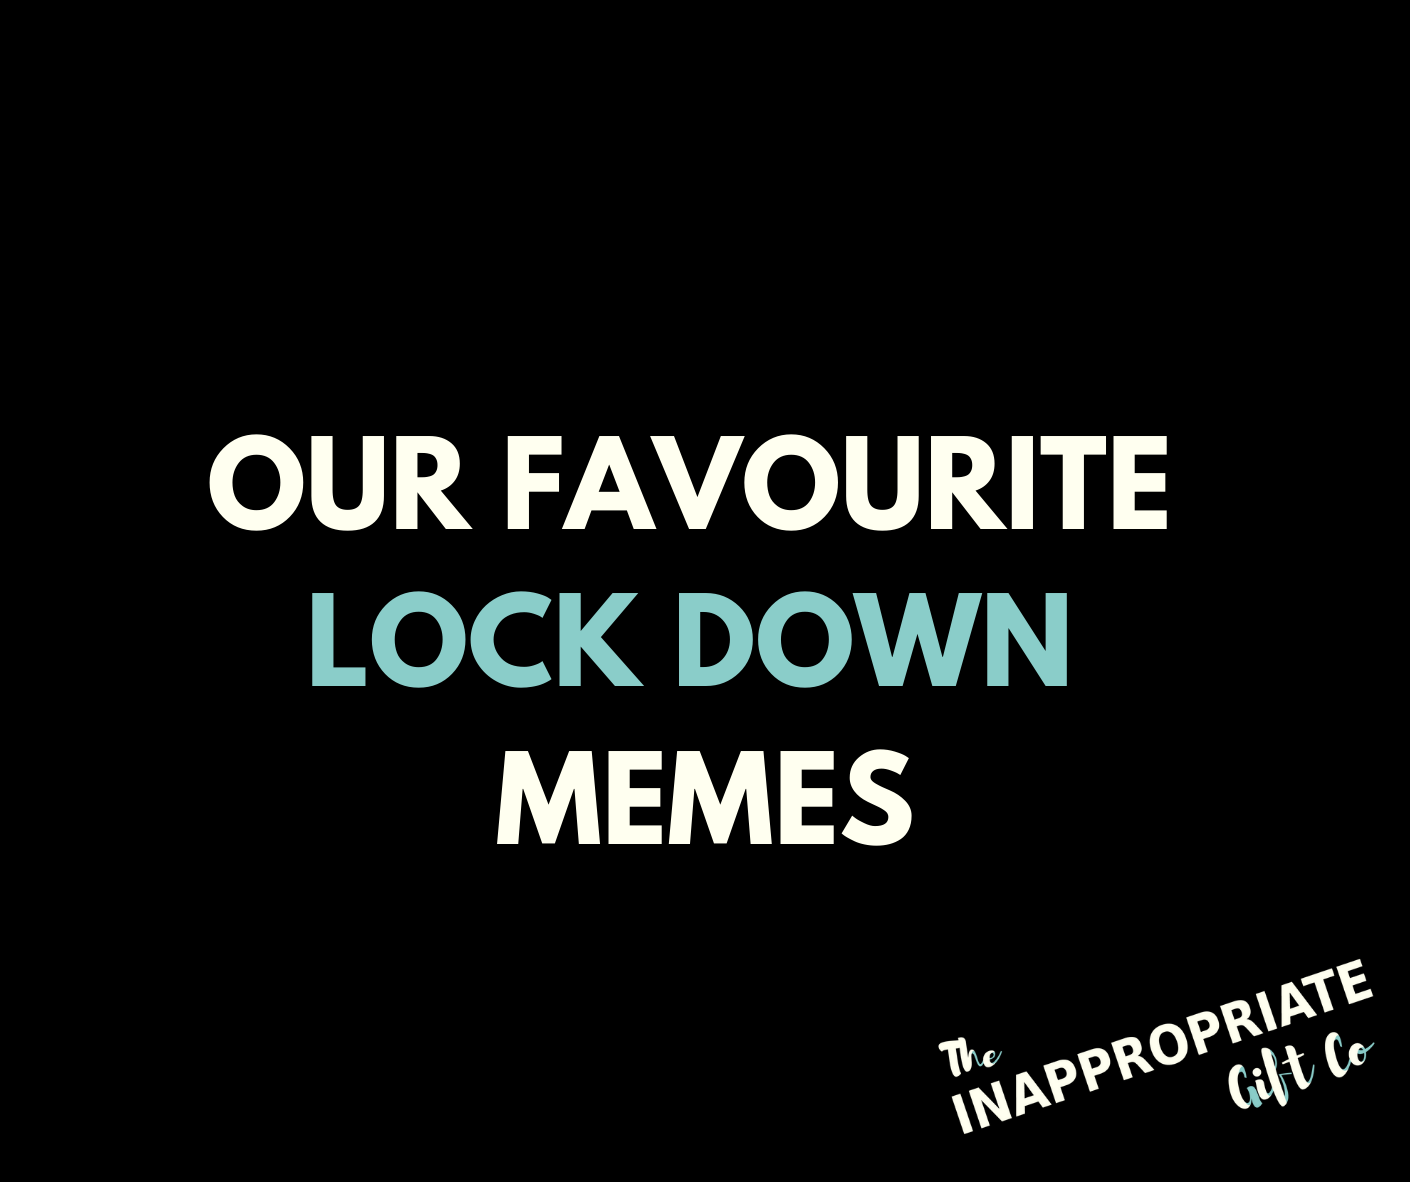 Our Favourite Lockdown Memes